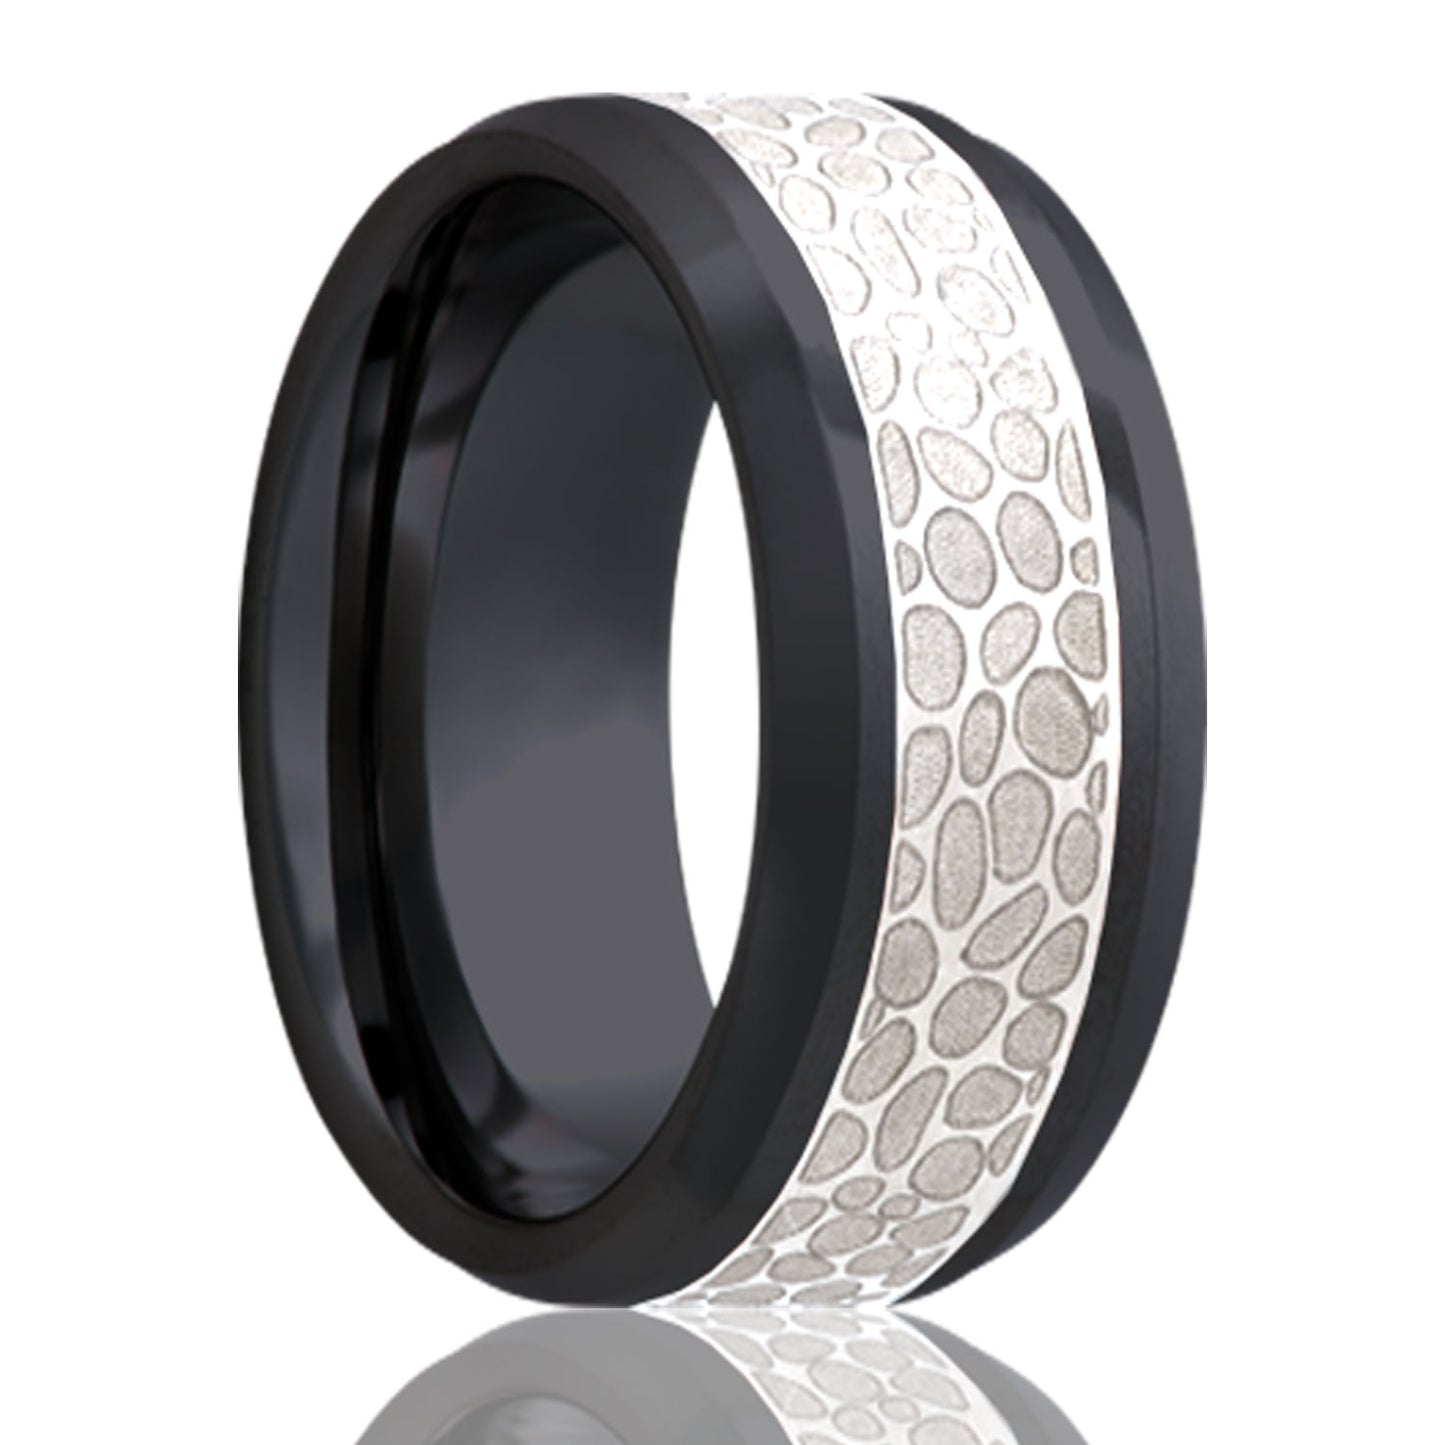 A hammered silver inlay zirconium wedding band with beveled edges displayed on a neutral white background.